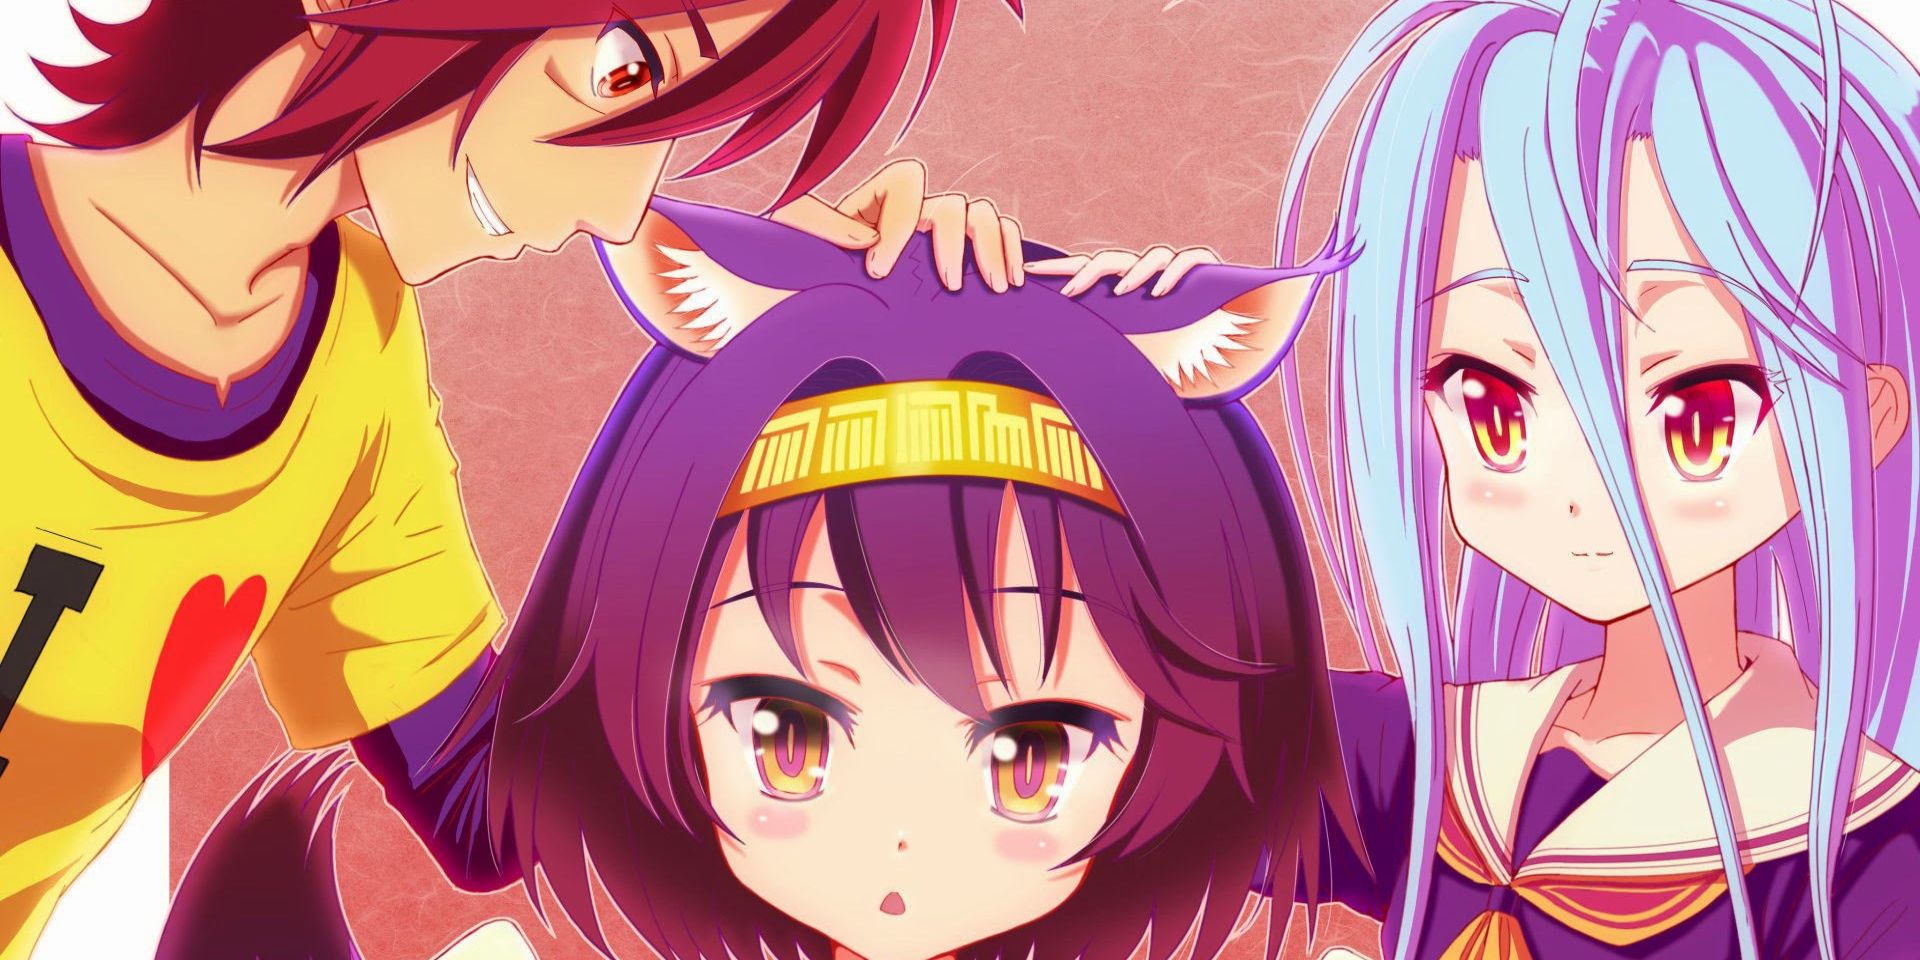 Characters from the anime series No Game No Life.